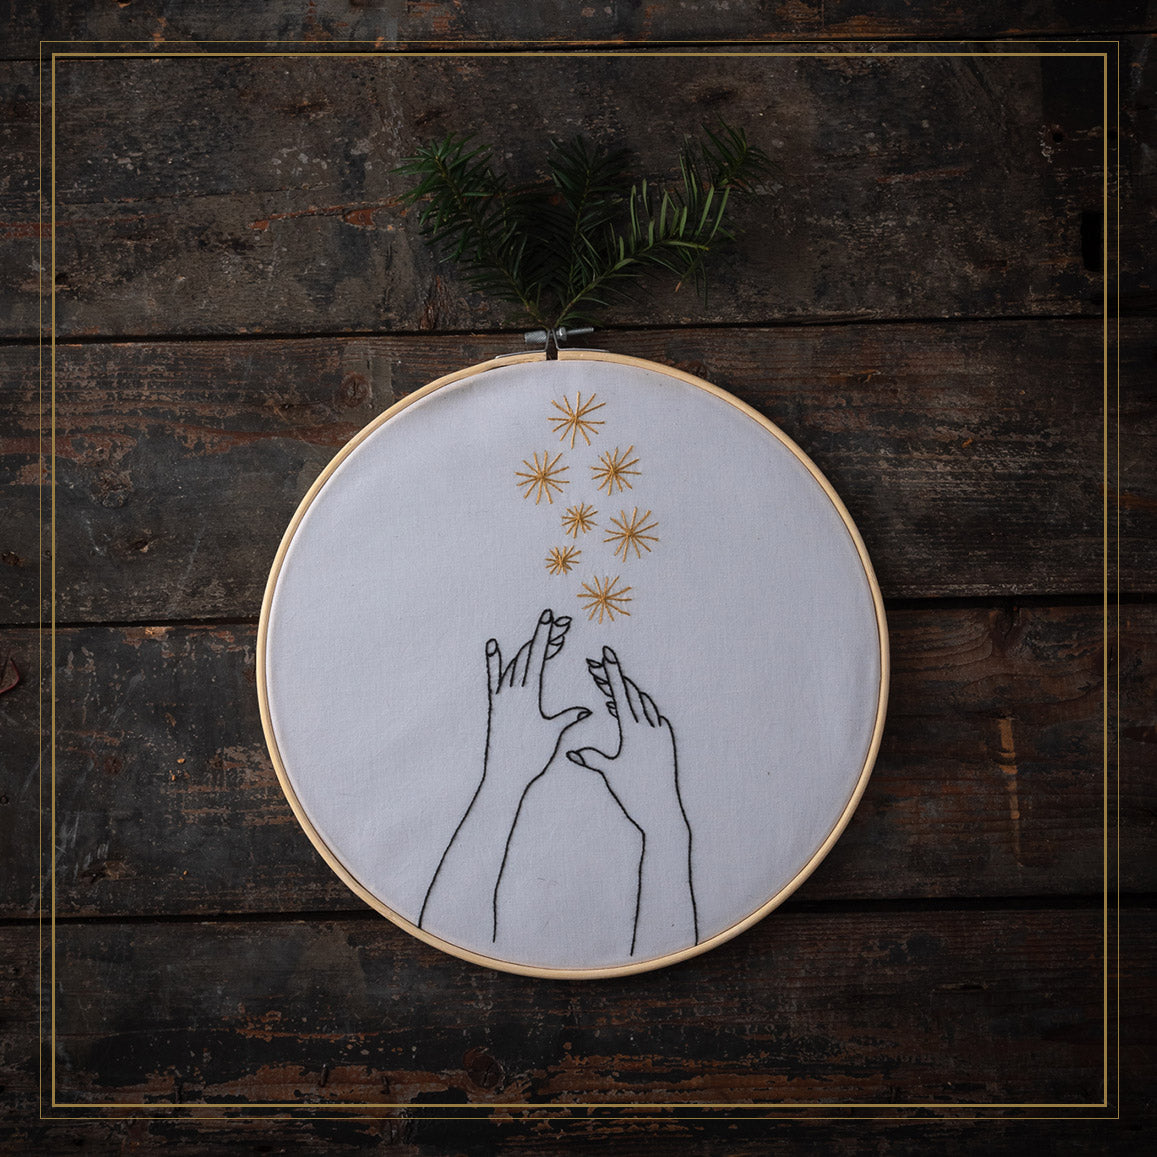 Large Embroidery hoop